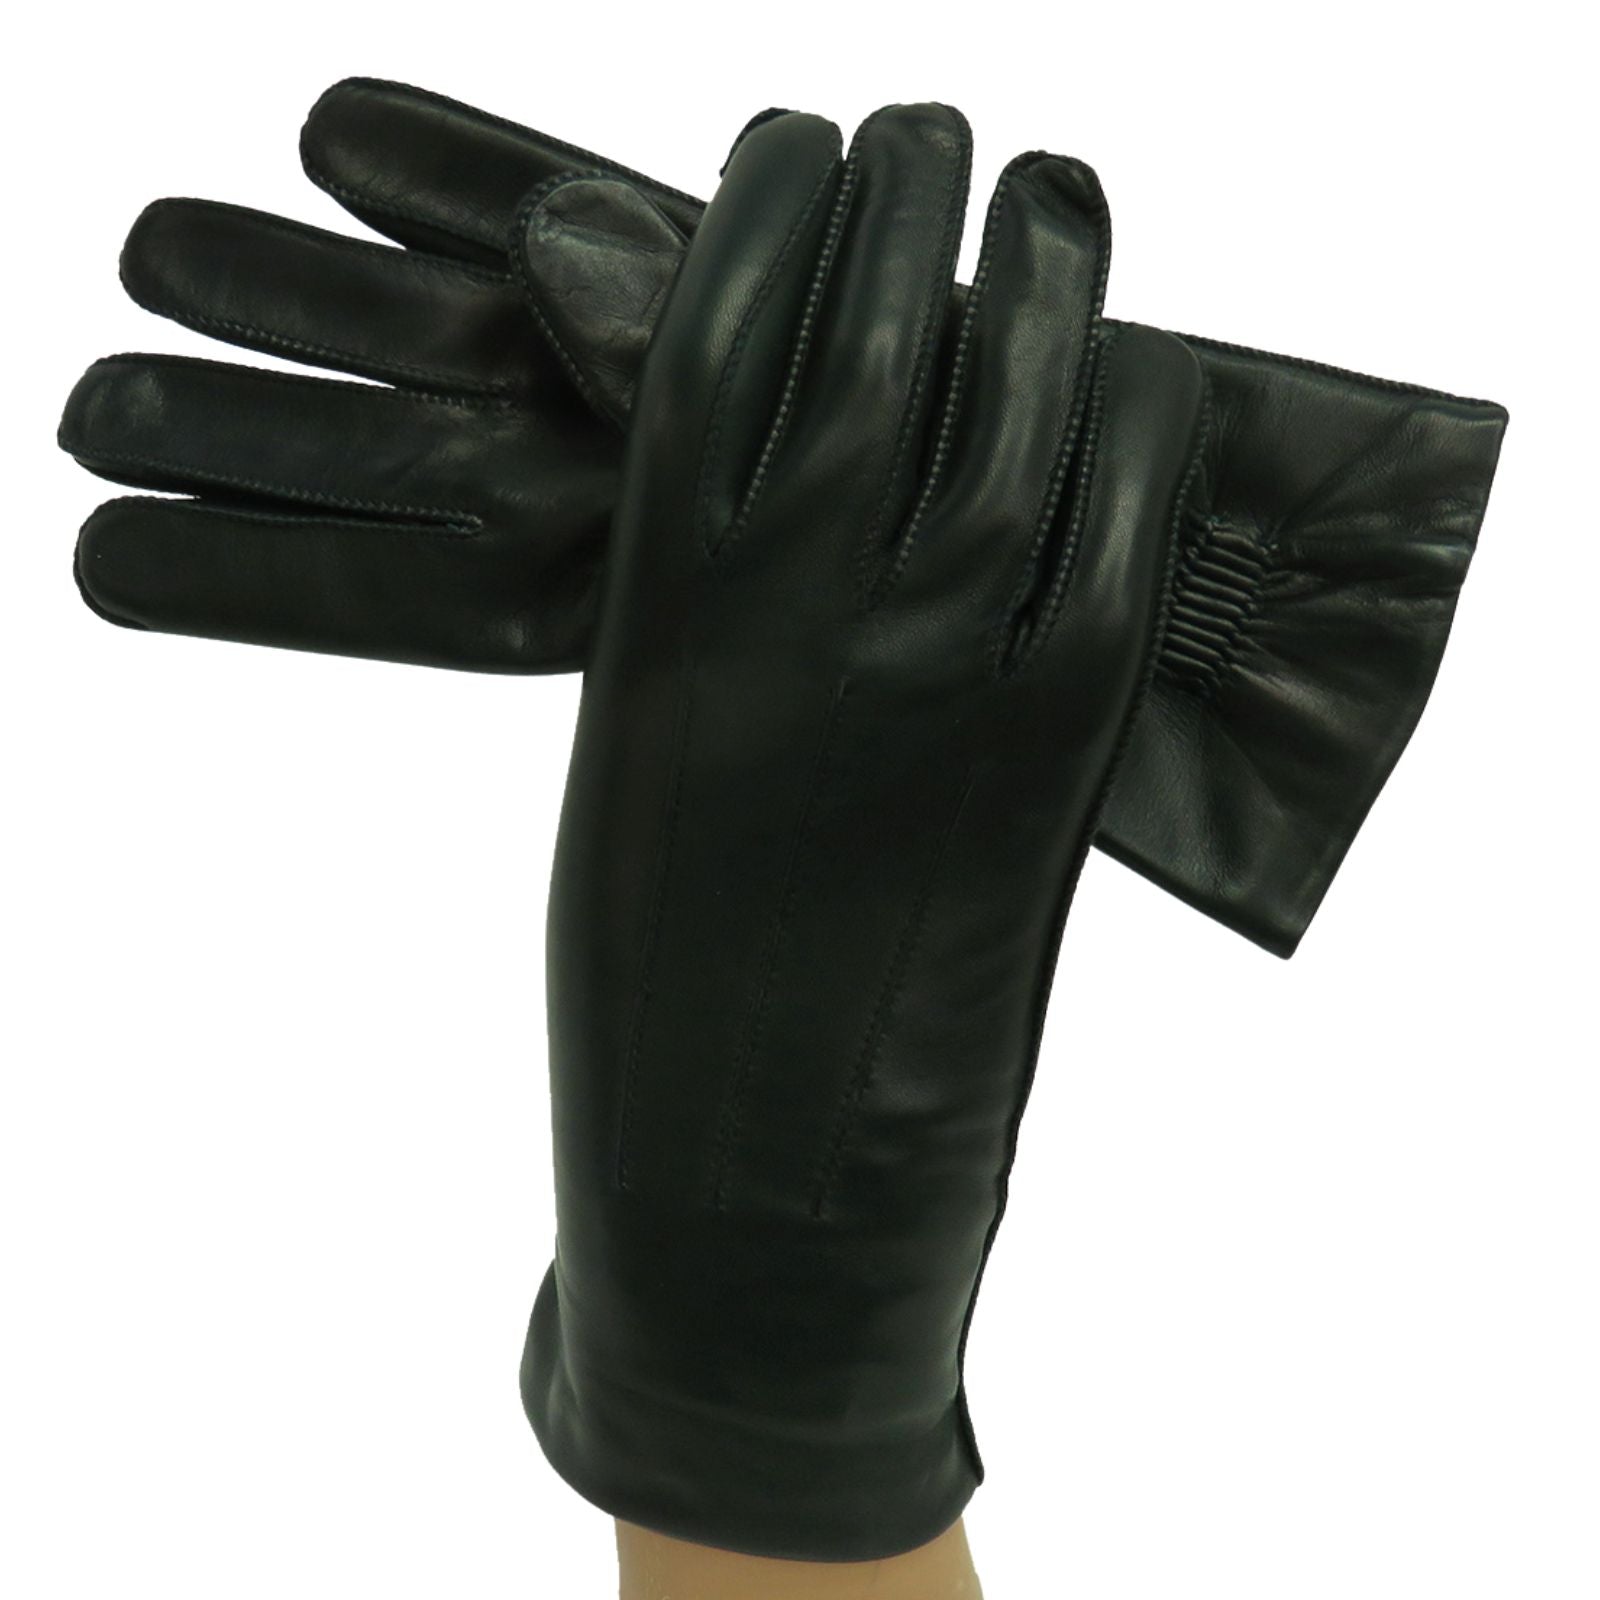 Leather  Glove, Petite sized (shorter fingers)